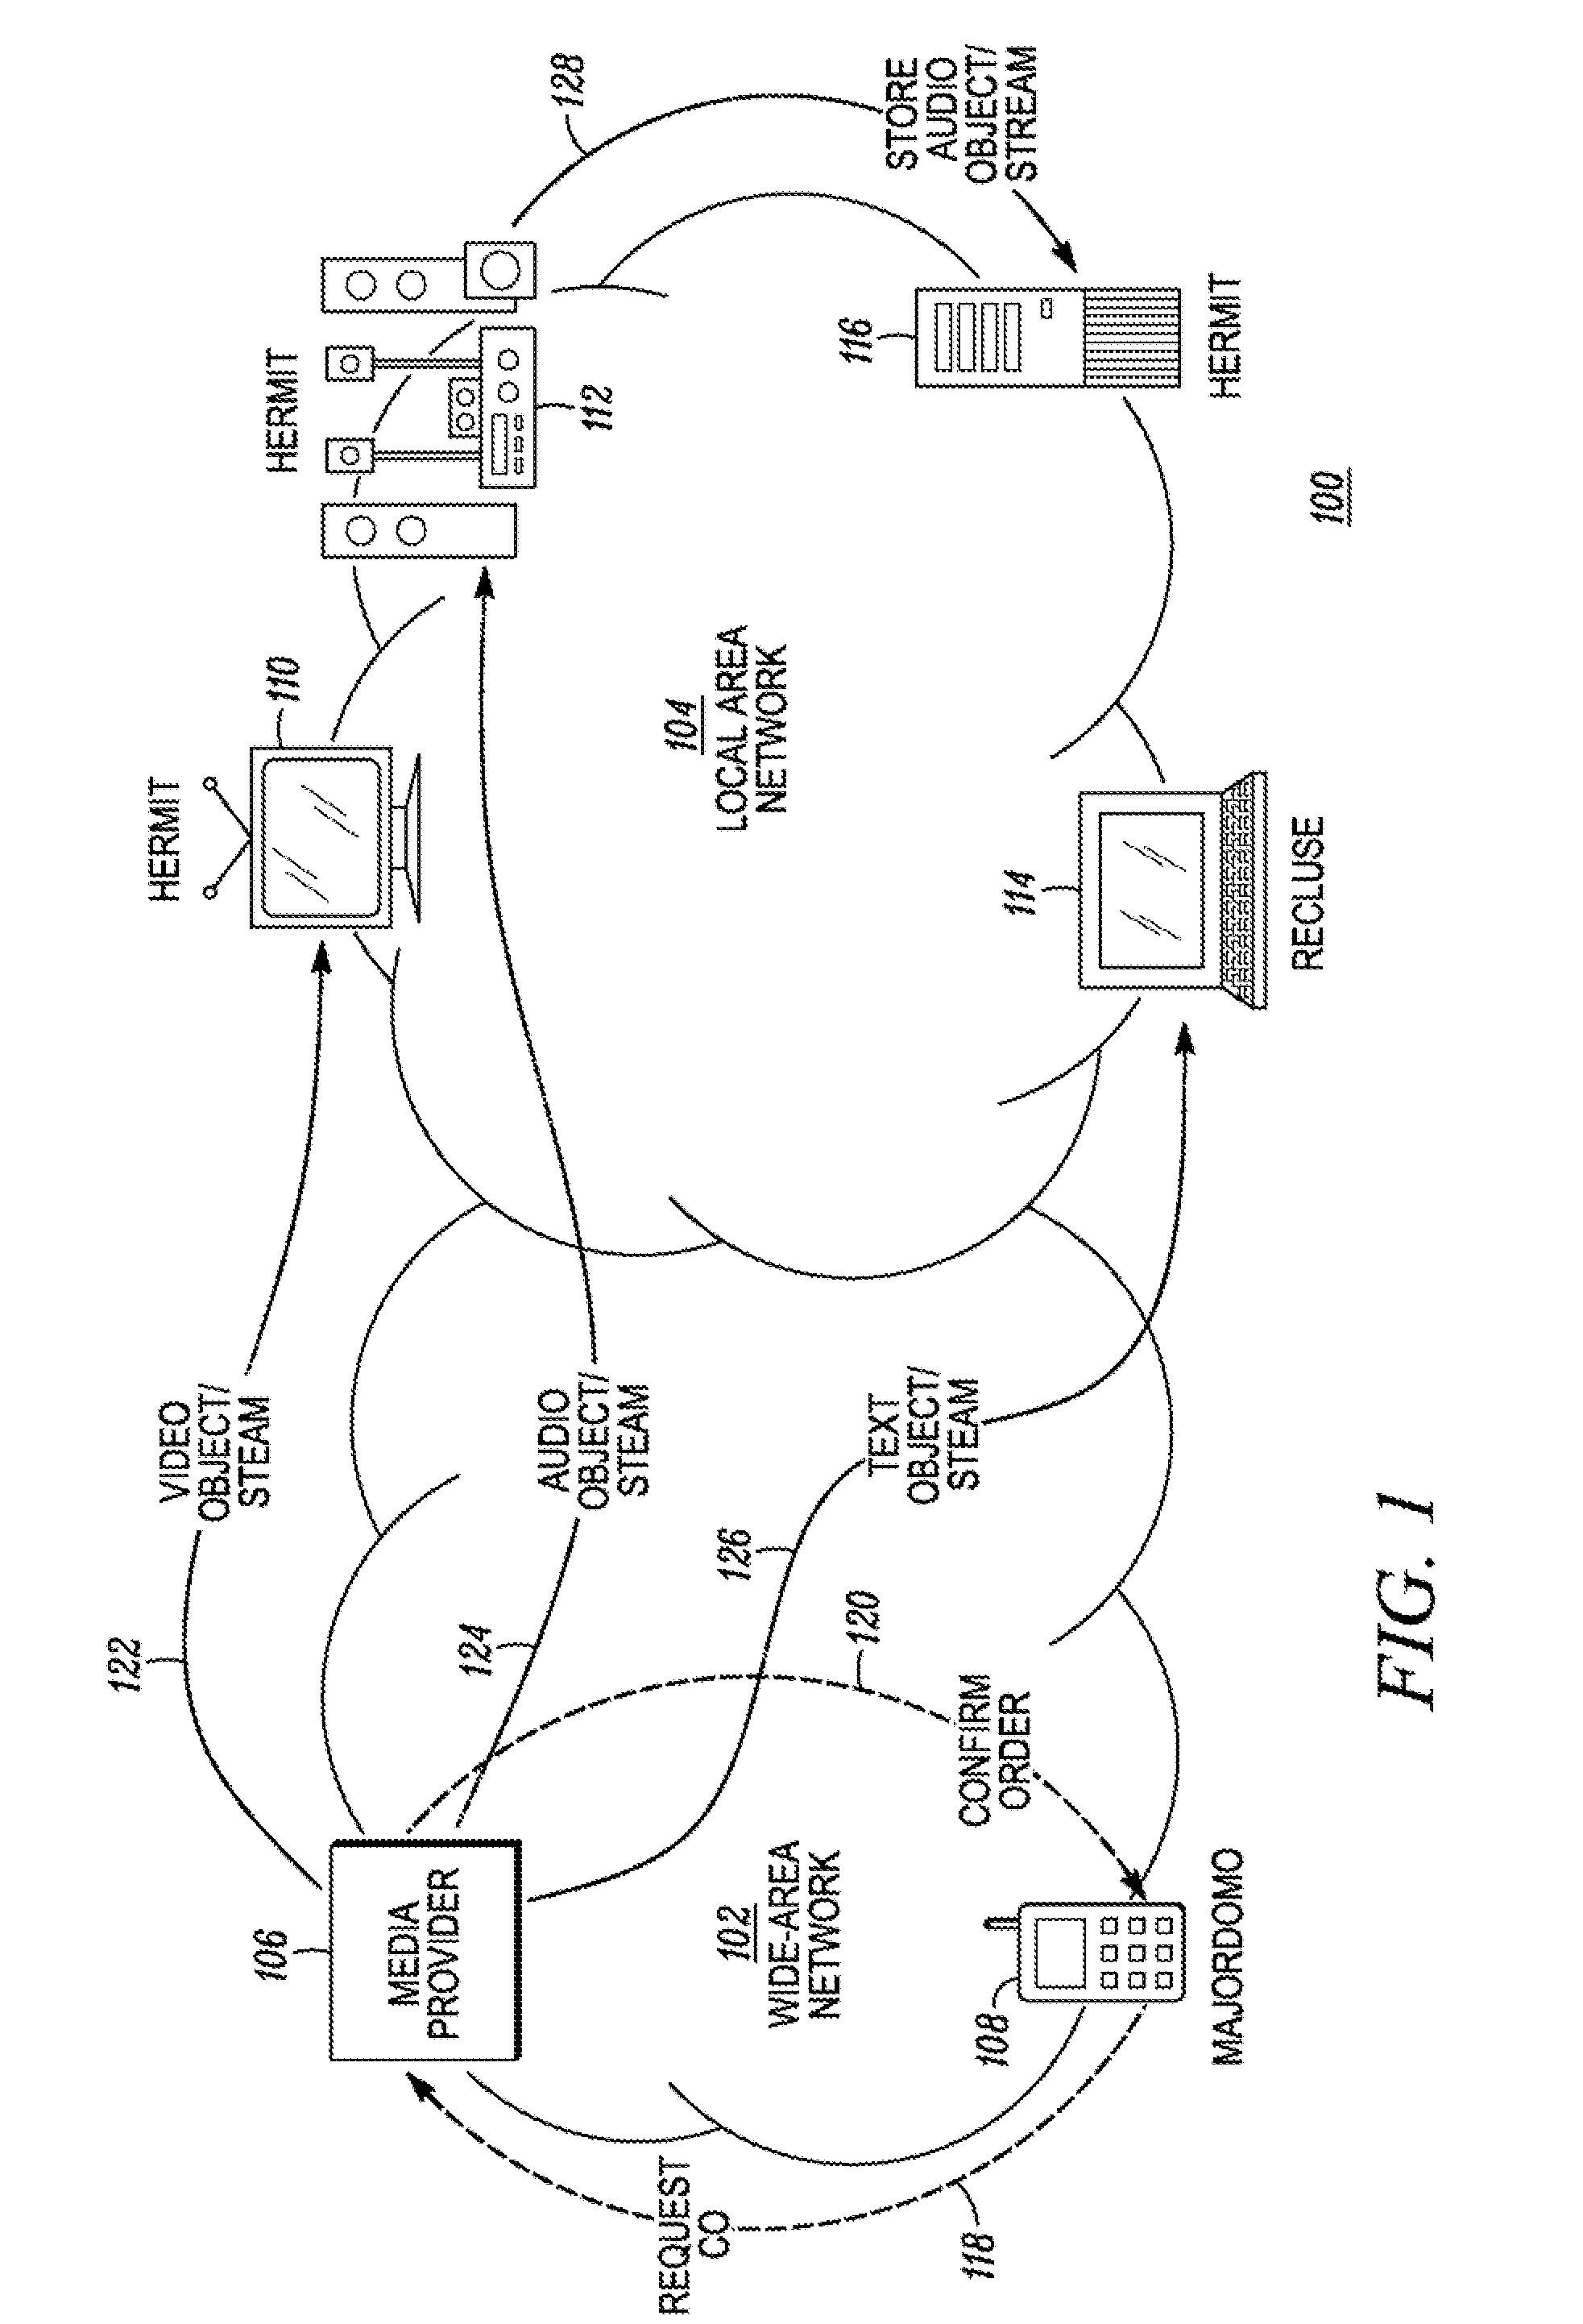 Method for managing security keys utilized by media devices in a local area network